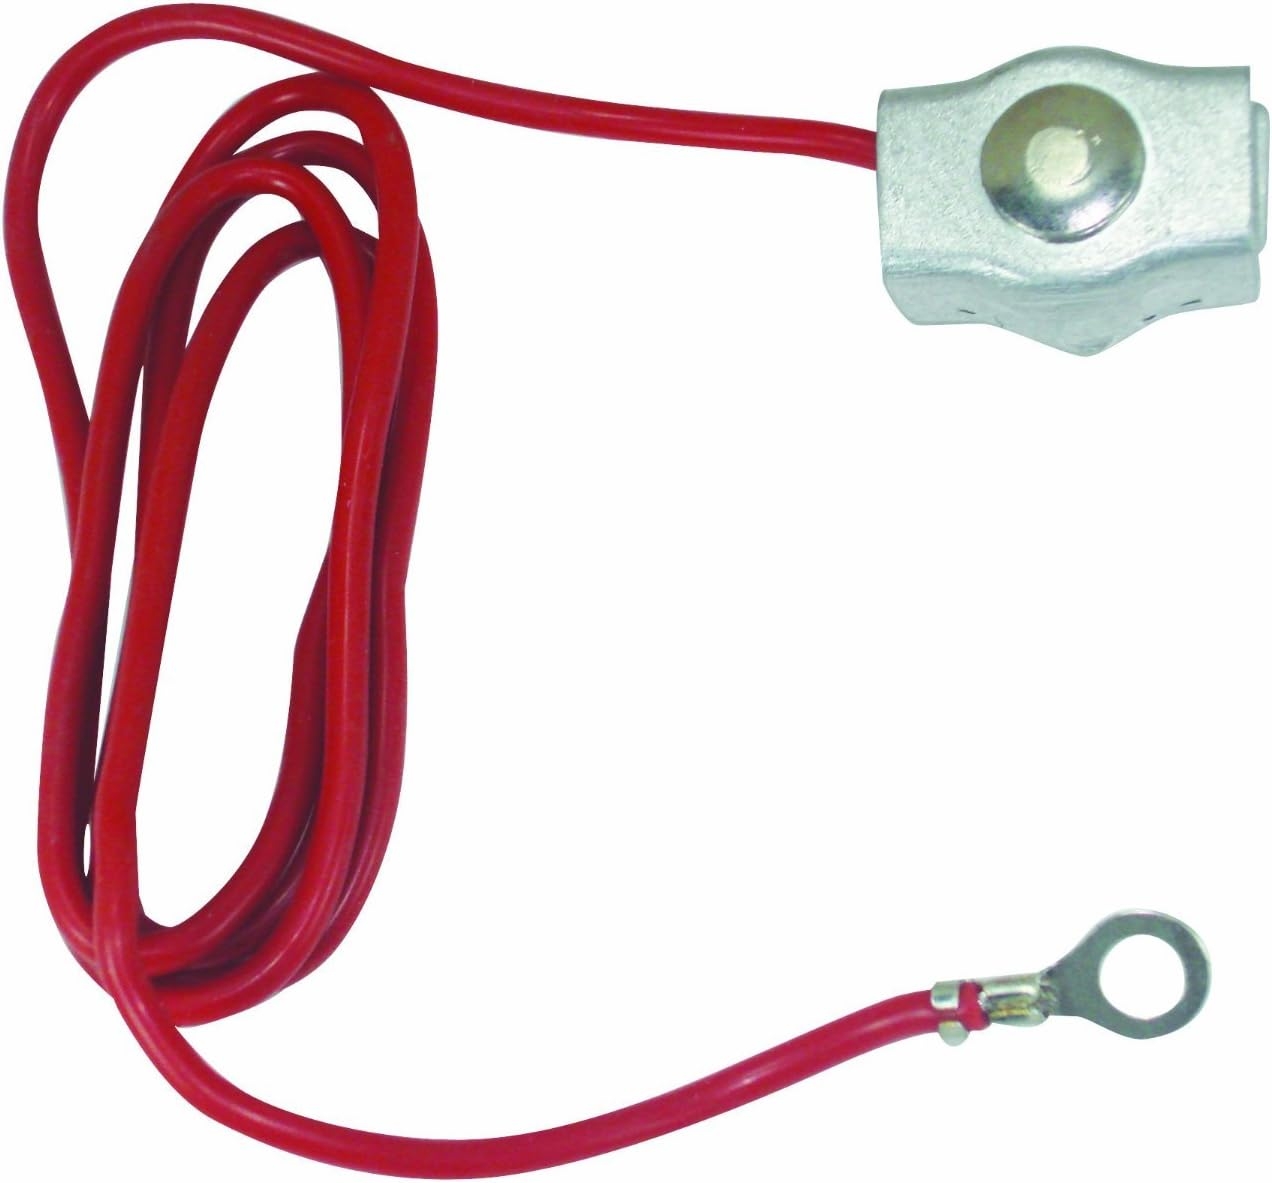 Tru Test 814709 Energizer to Rope Braid Connector   price checker   price checker Description Gallery Reviews Variations